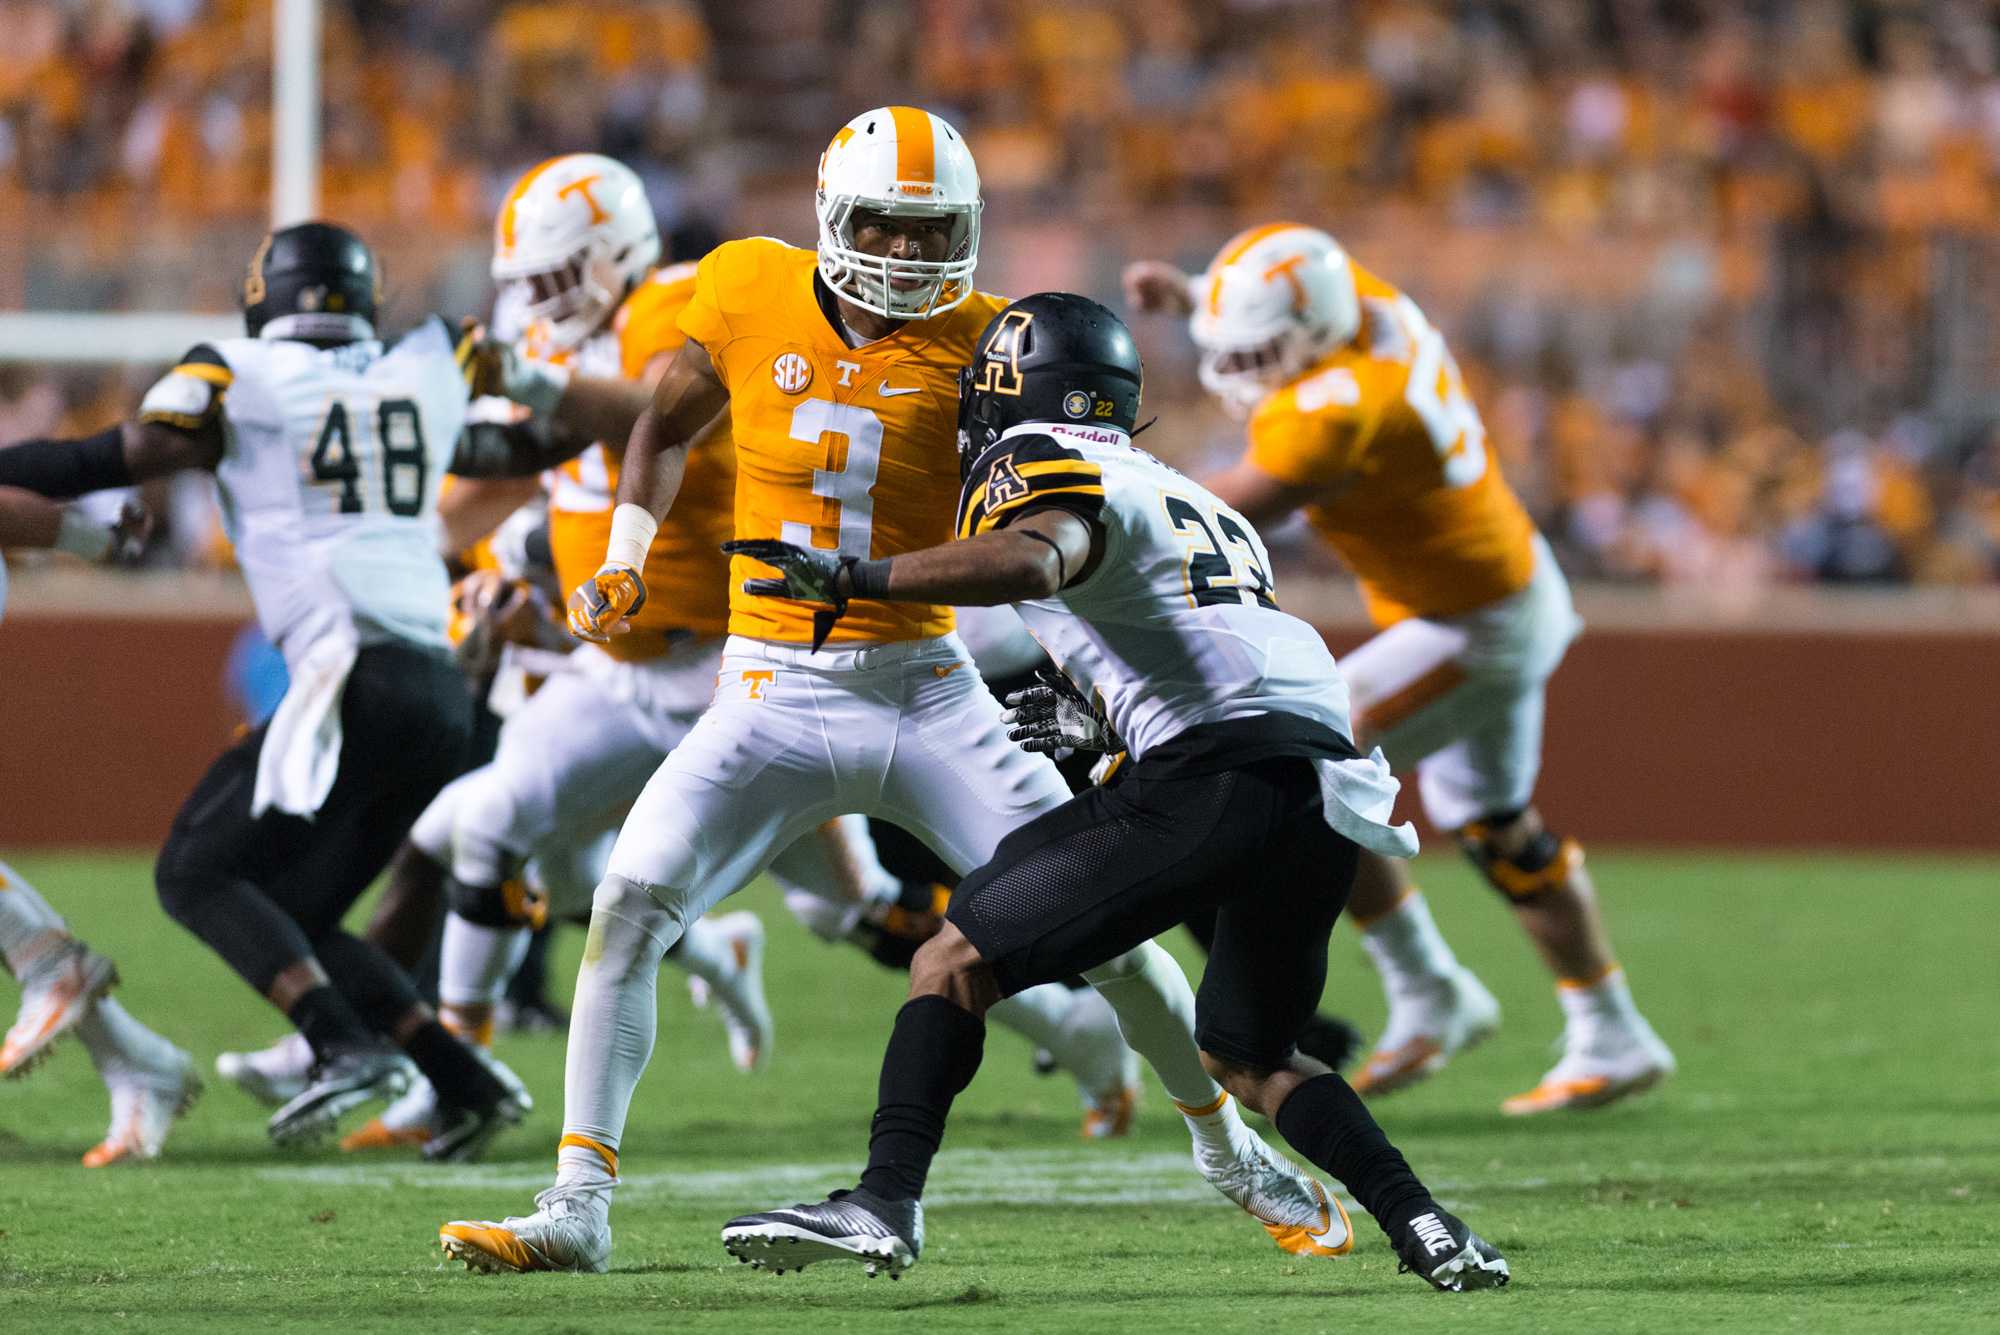 Freshman+defensive+back+Clifton+Duck+broke+up+two+passes+and+made+four+solo+tackles+against+the+Vols+on+September+1.